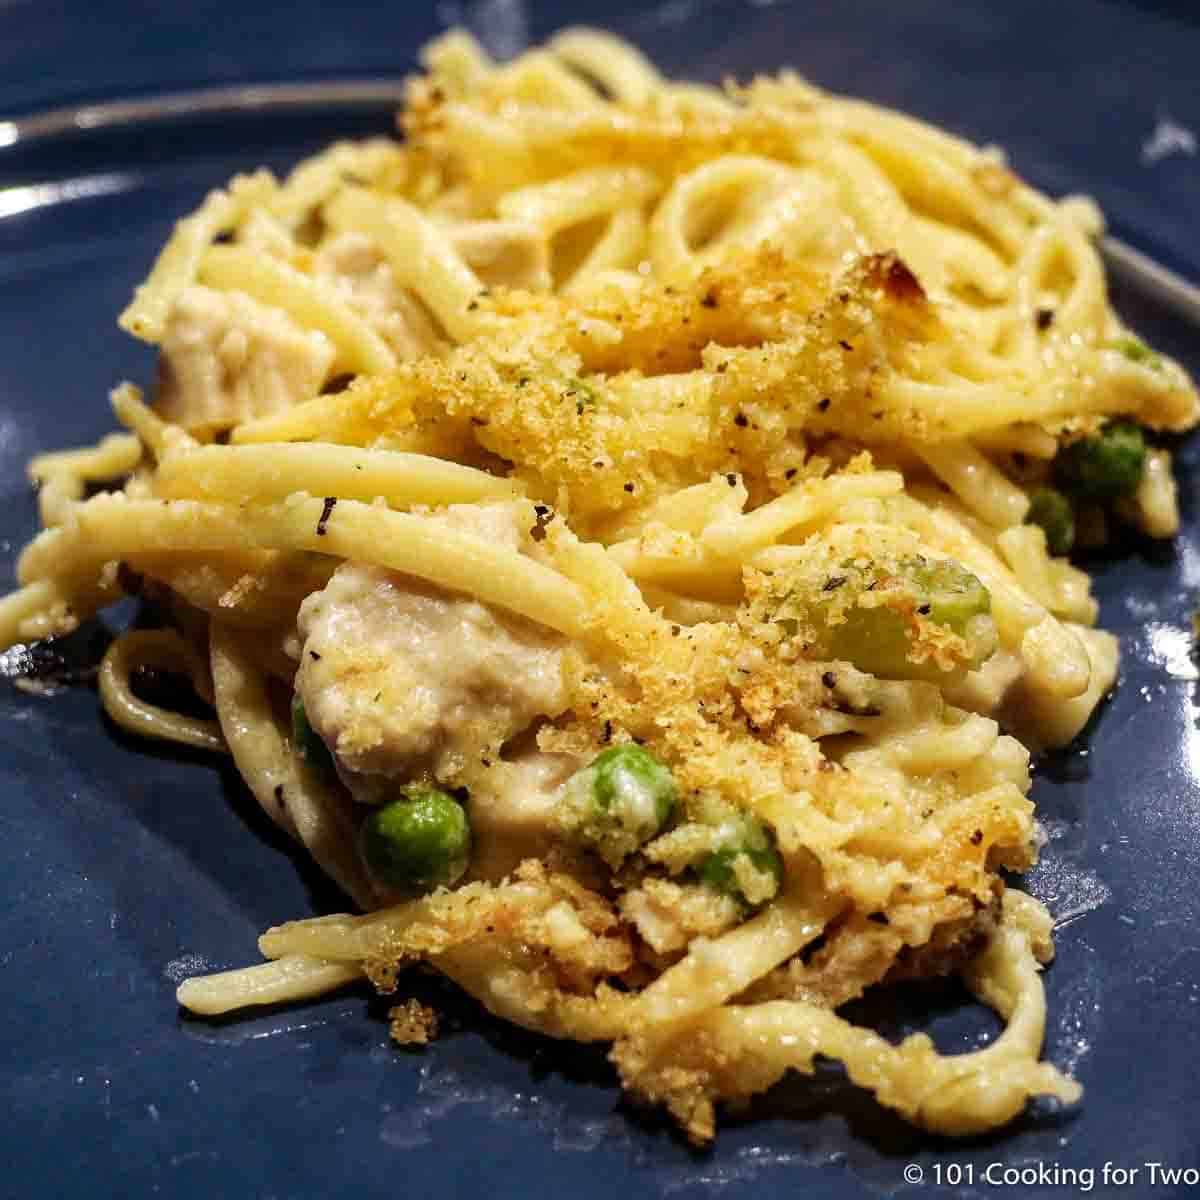 A large serving of turkey tetrazzini on a blue plate.